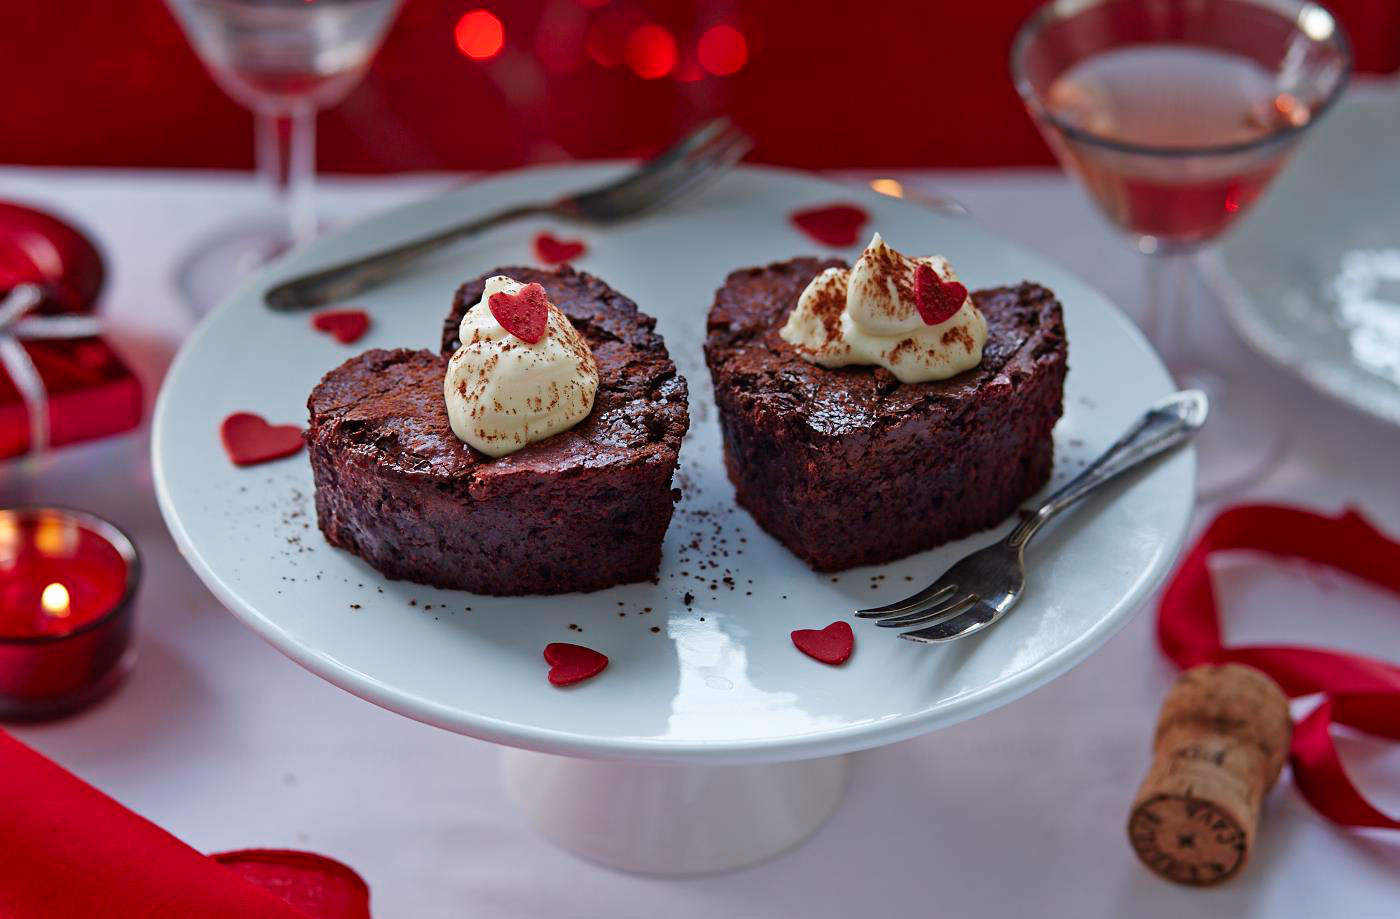 15 Romantic Dessert Recipes for a Sweet Valentine's Day (Part 2)